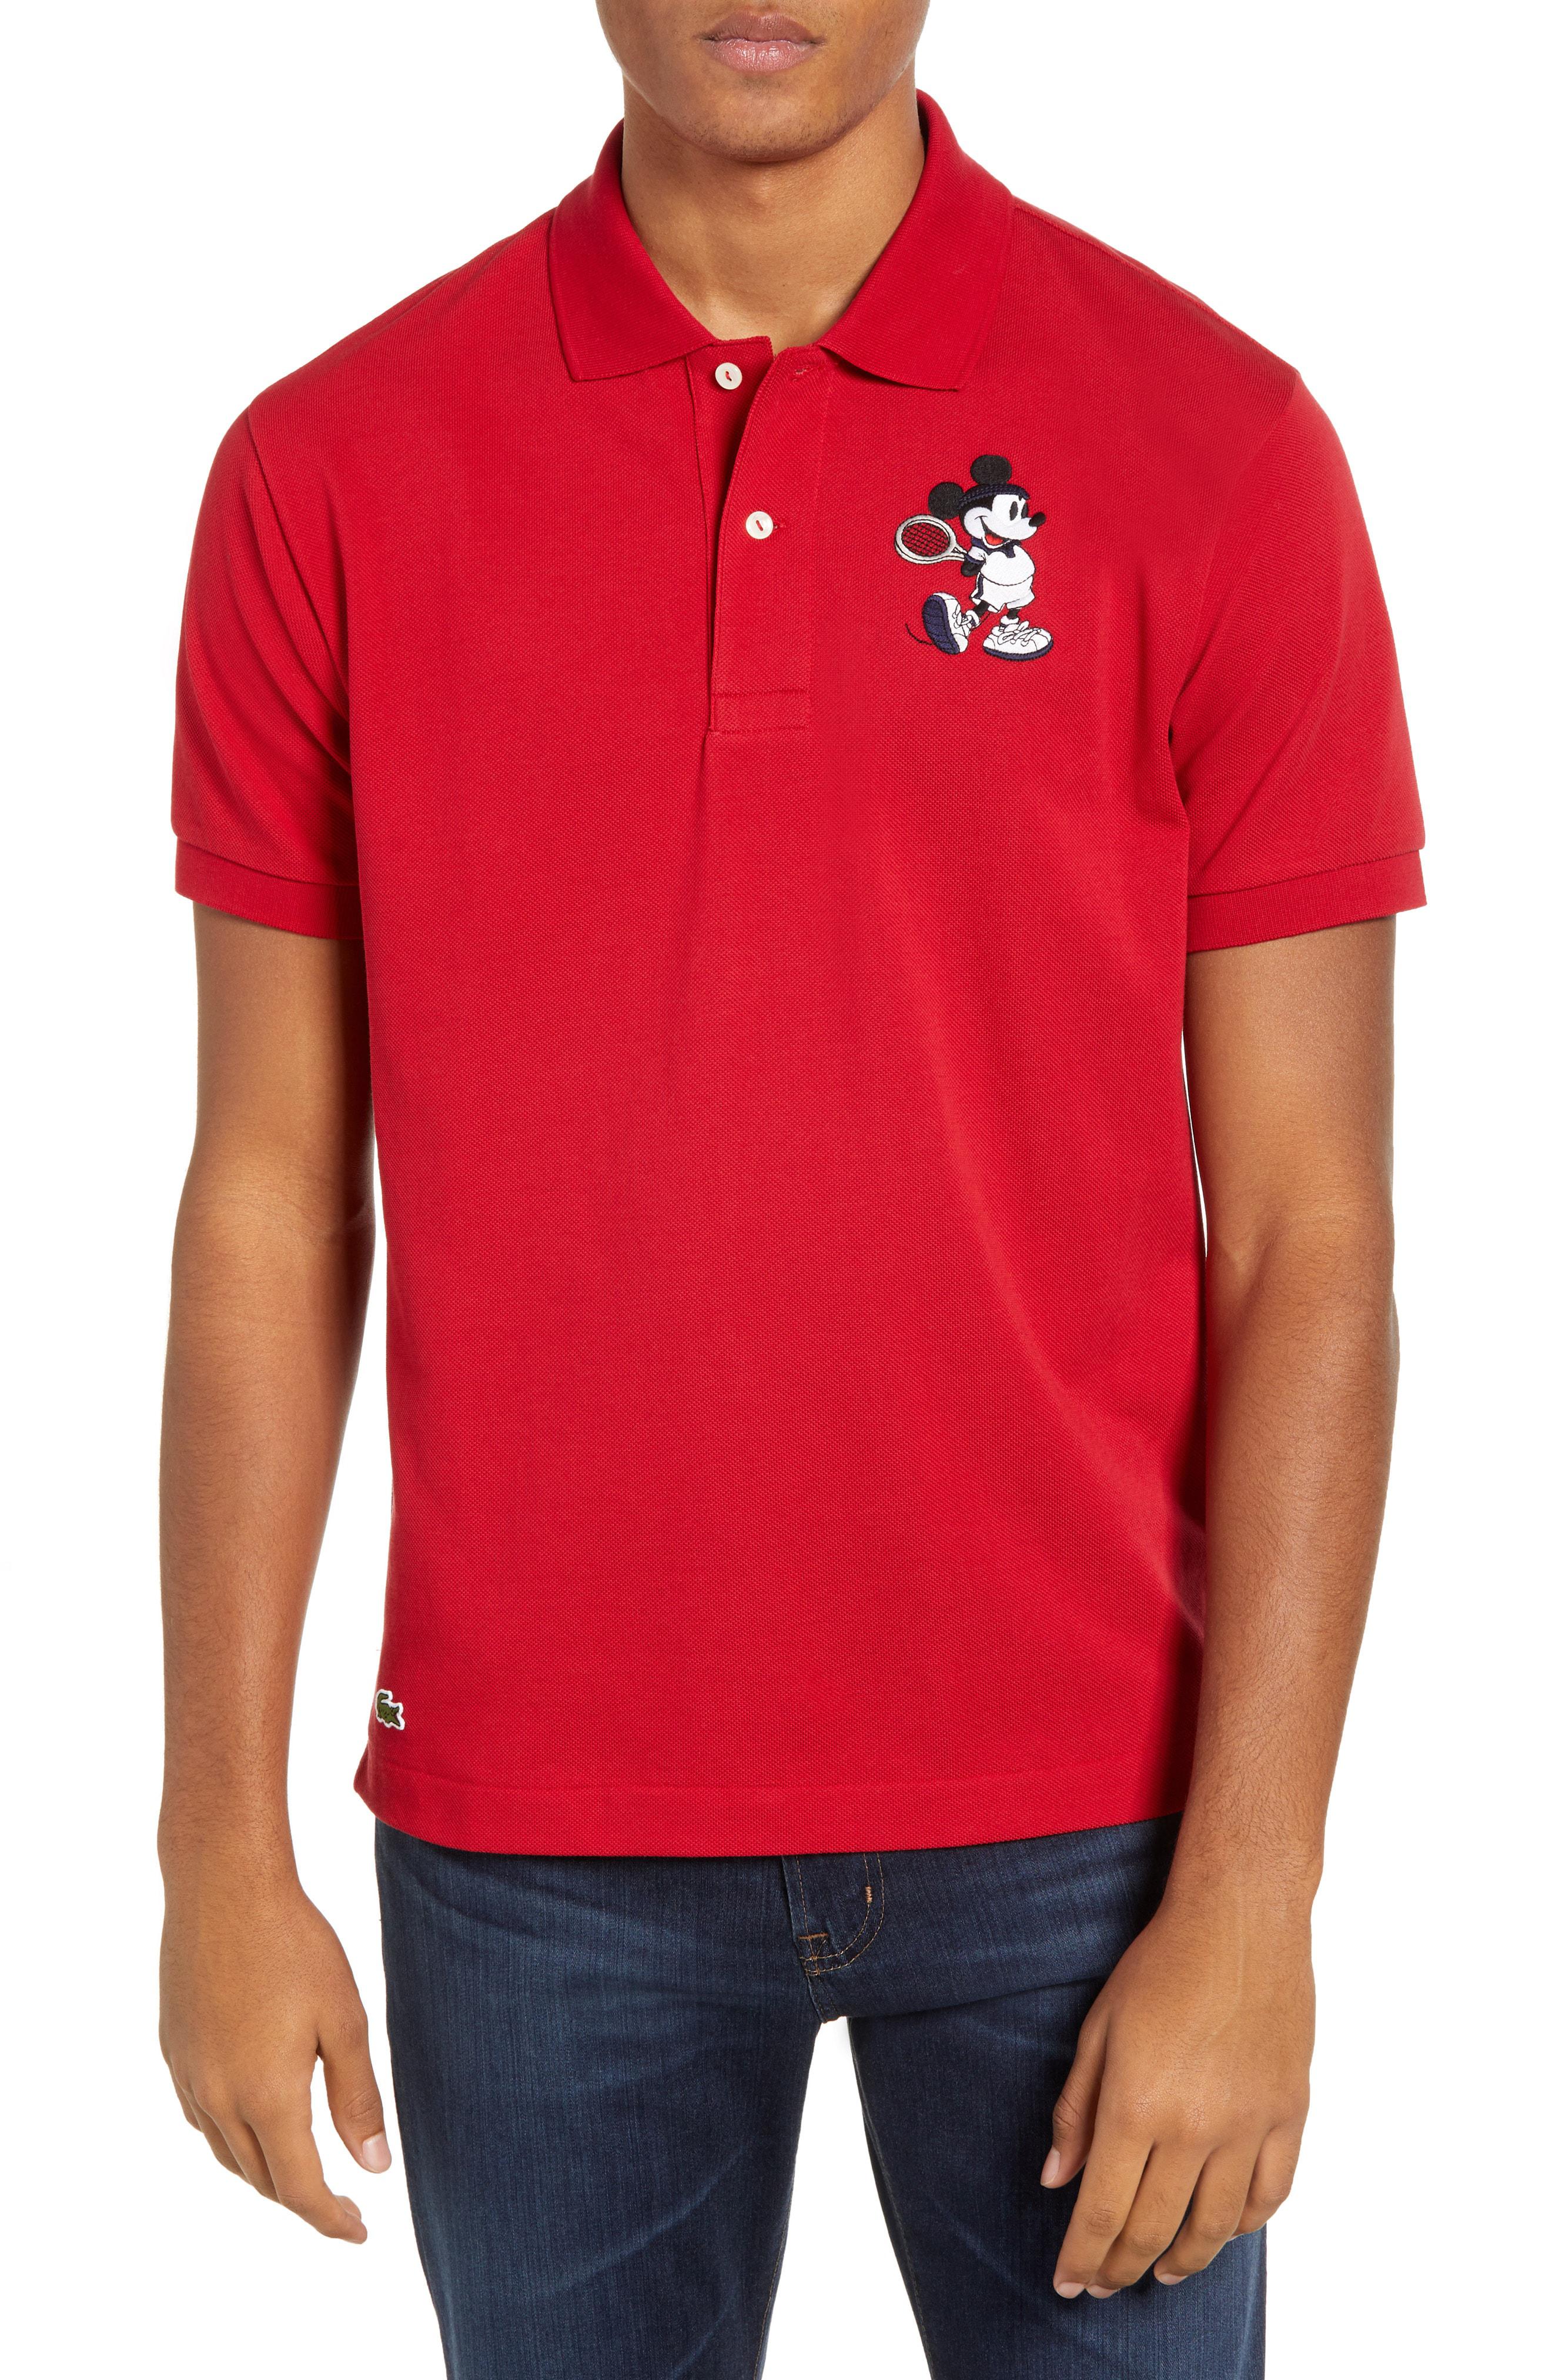 Lacoste Disney Mickey Mouse Regular Fit Polo in Red for Men - Lyst